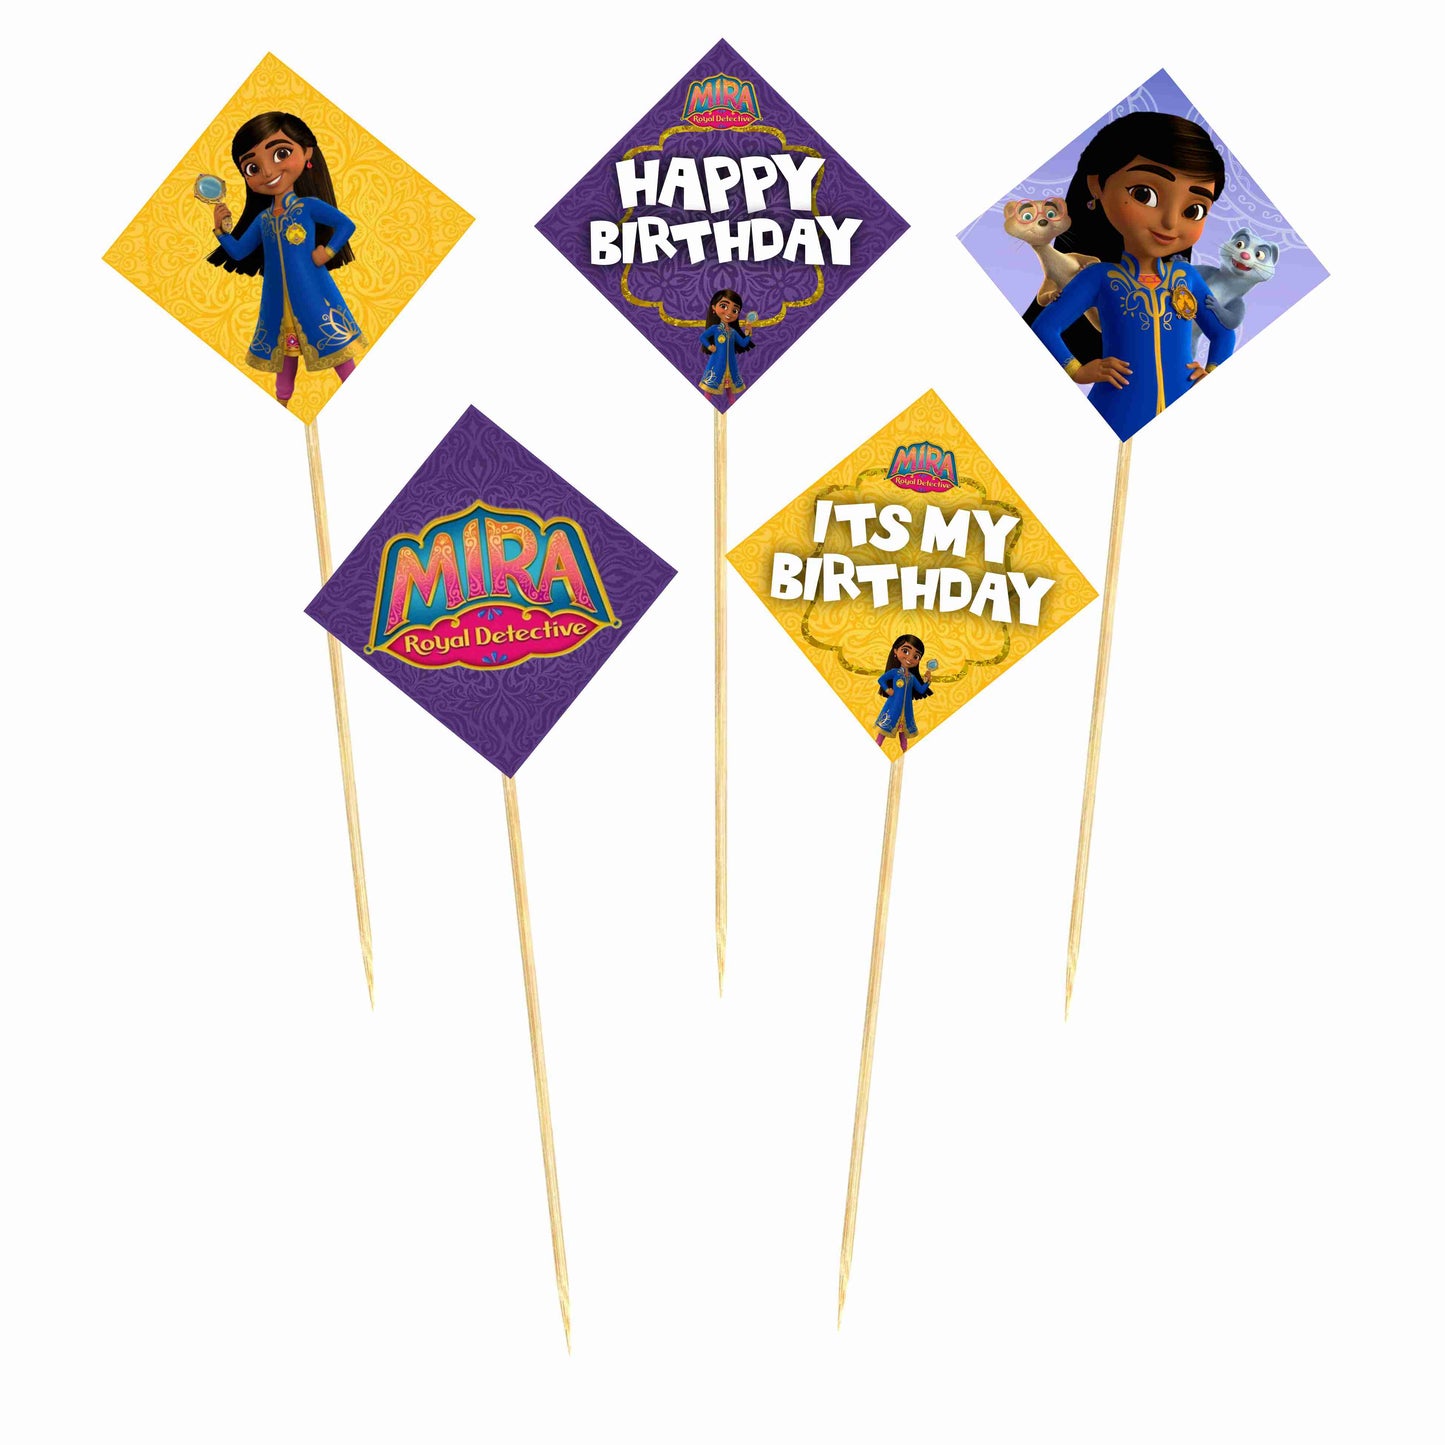 Mira Detective Theme Cake Topper Pack of 10 Nos for Birthday Cake Decoration Theme Party Item For Boys Girls Adults Birthday Theme Decor